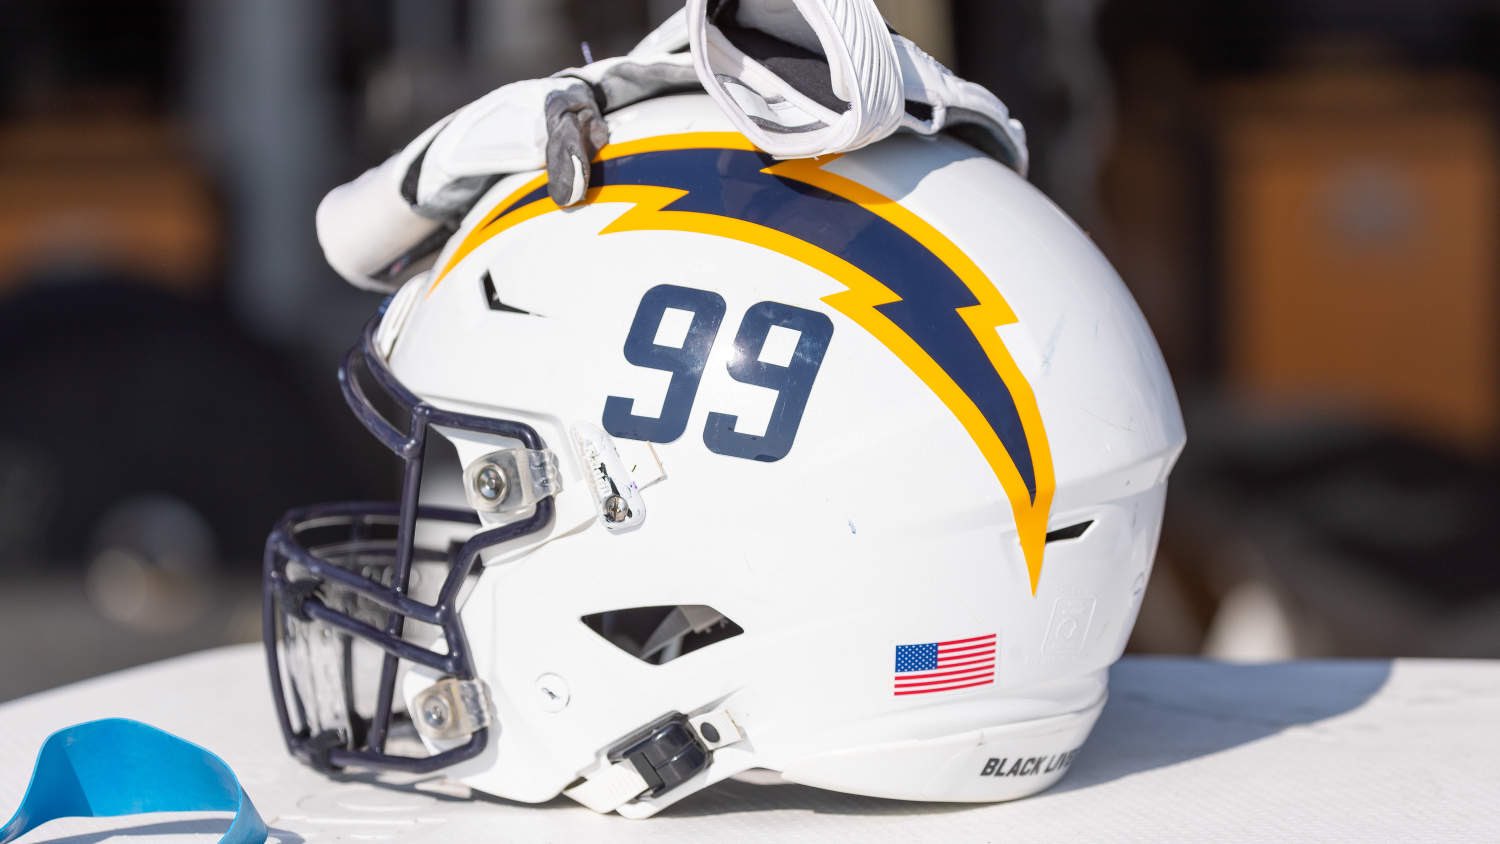 Helmet Stalker on X: The Los Angeles Chargers will be using their navy-blue  alternate uniforms this week. The helmet decals, numbers and facemasks have  been swapped to their navy-blue variant.  /